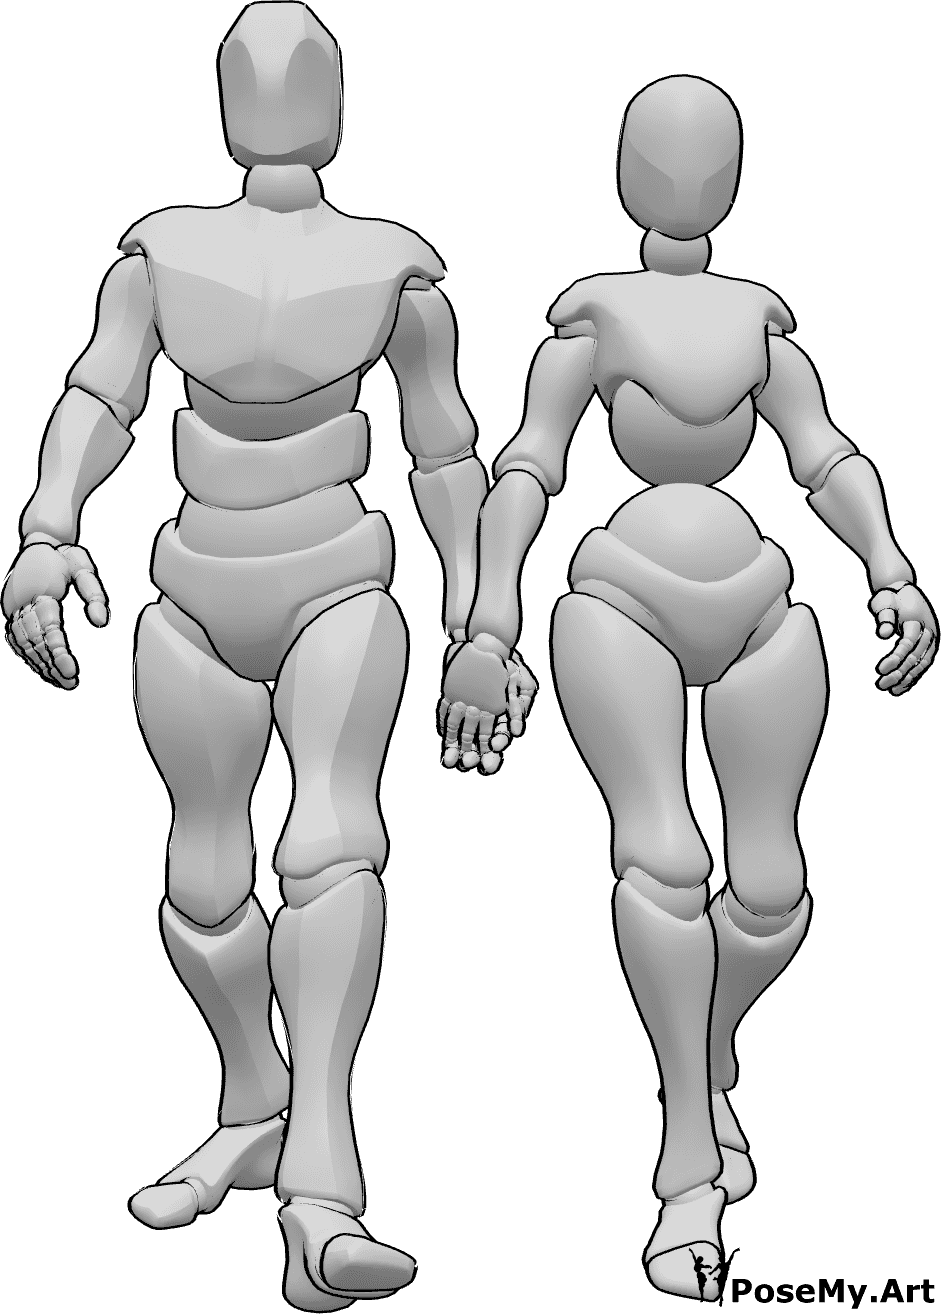 Pose Reference- Confident couple walking pose - Couple is walking together confidently and holdinh each others hands